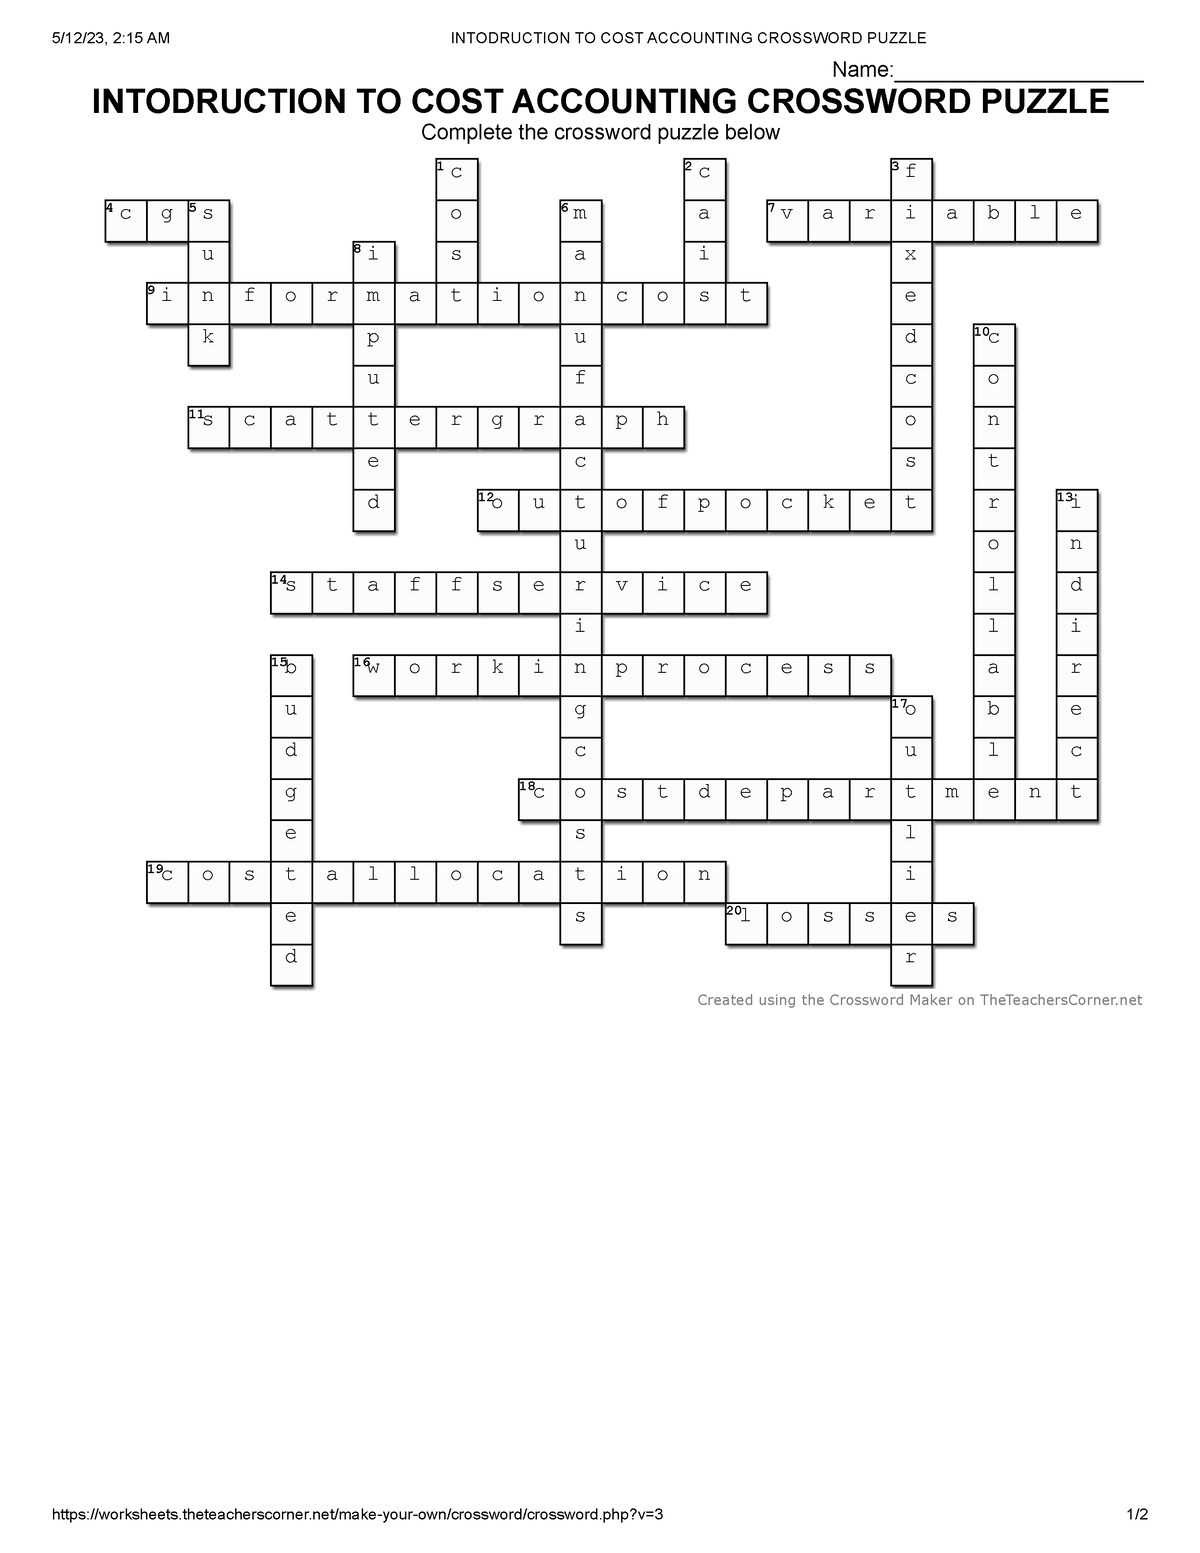 Intodruction TO COST Accounting Crossword Puzzle WITH Answer 5/12/23